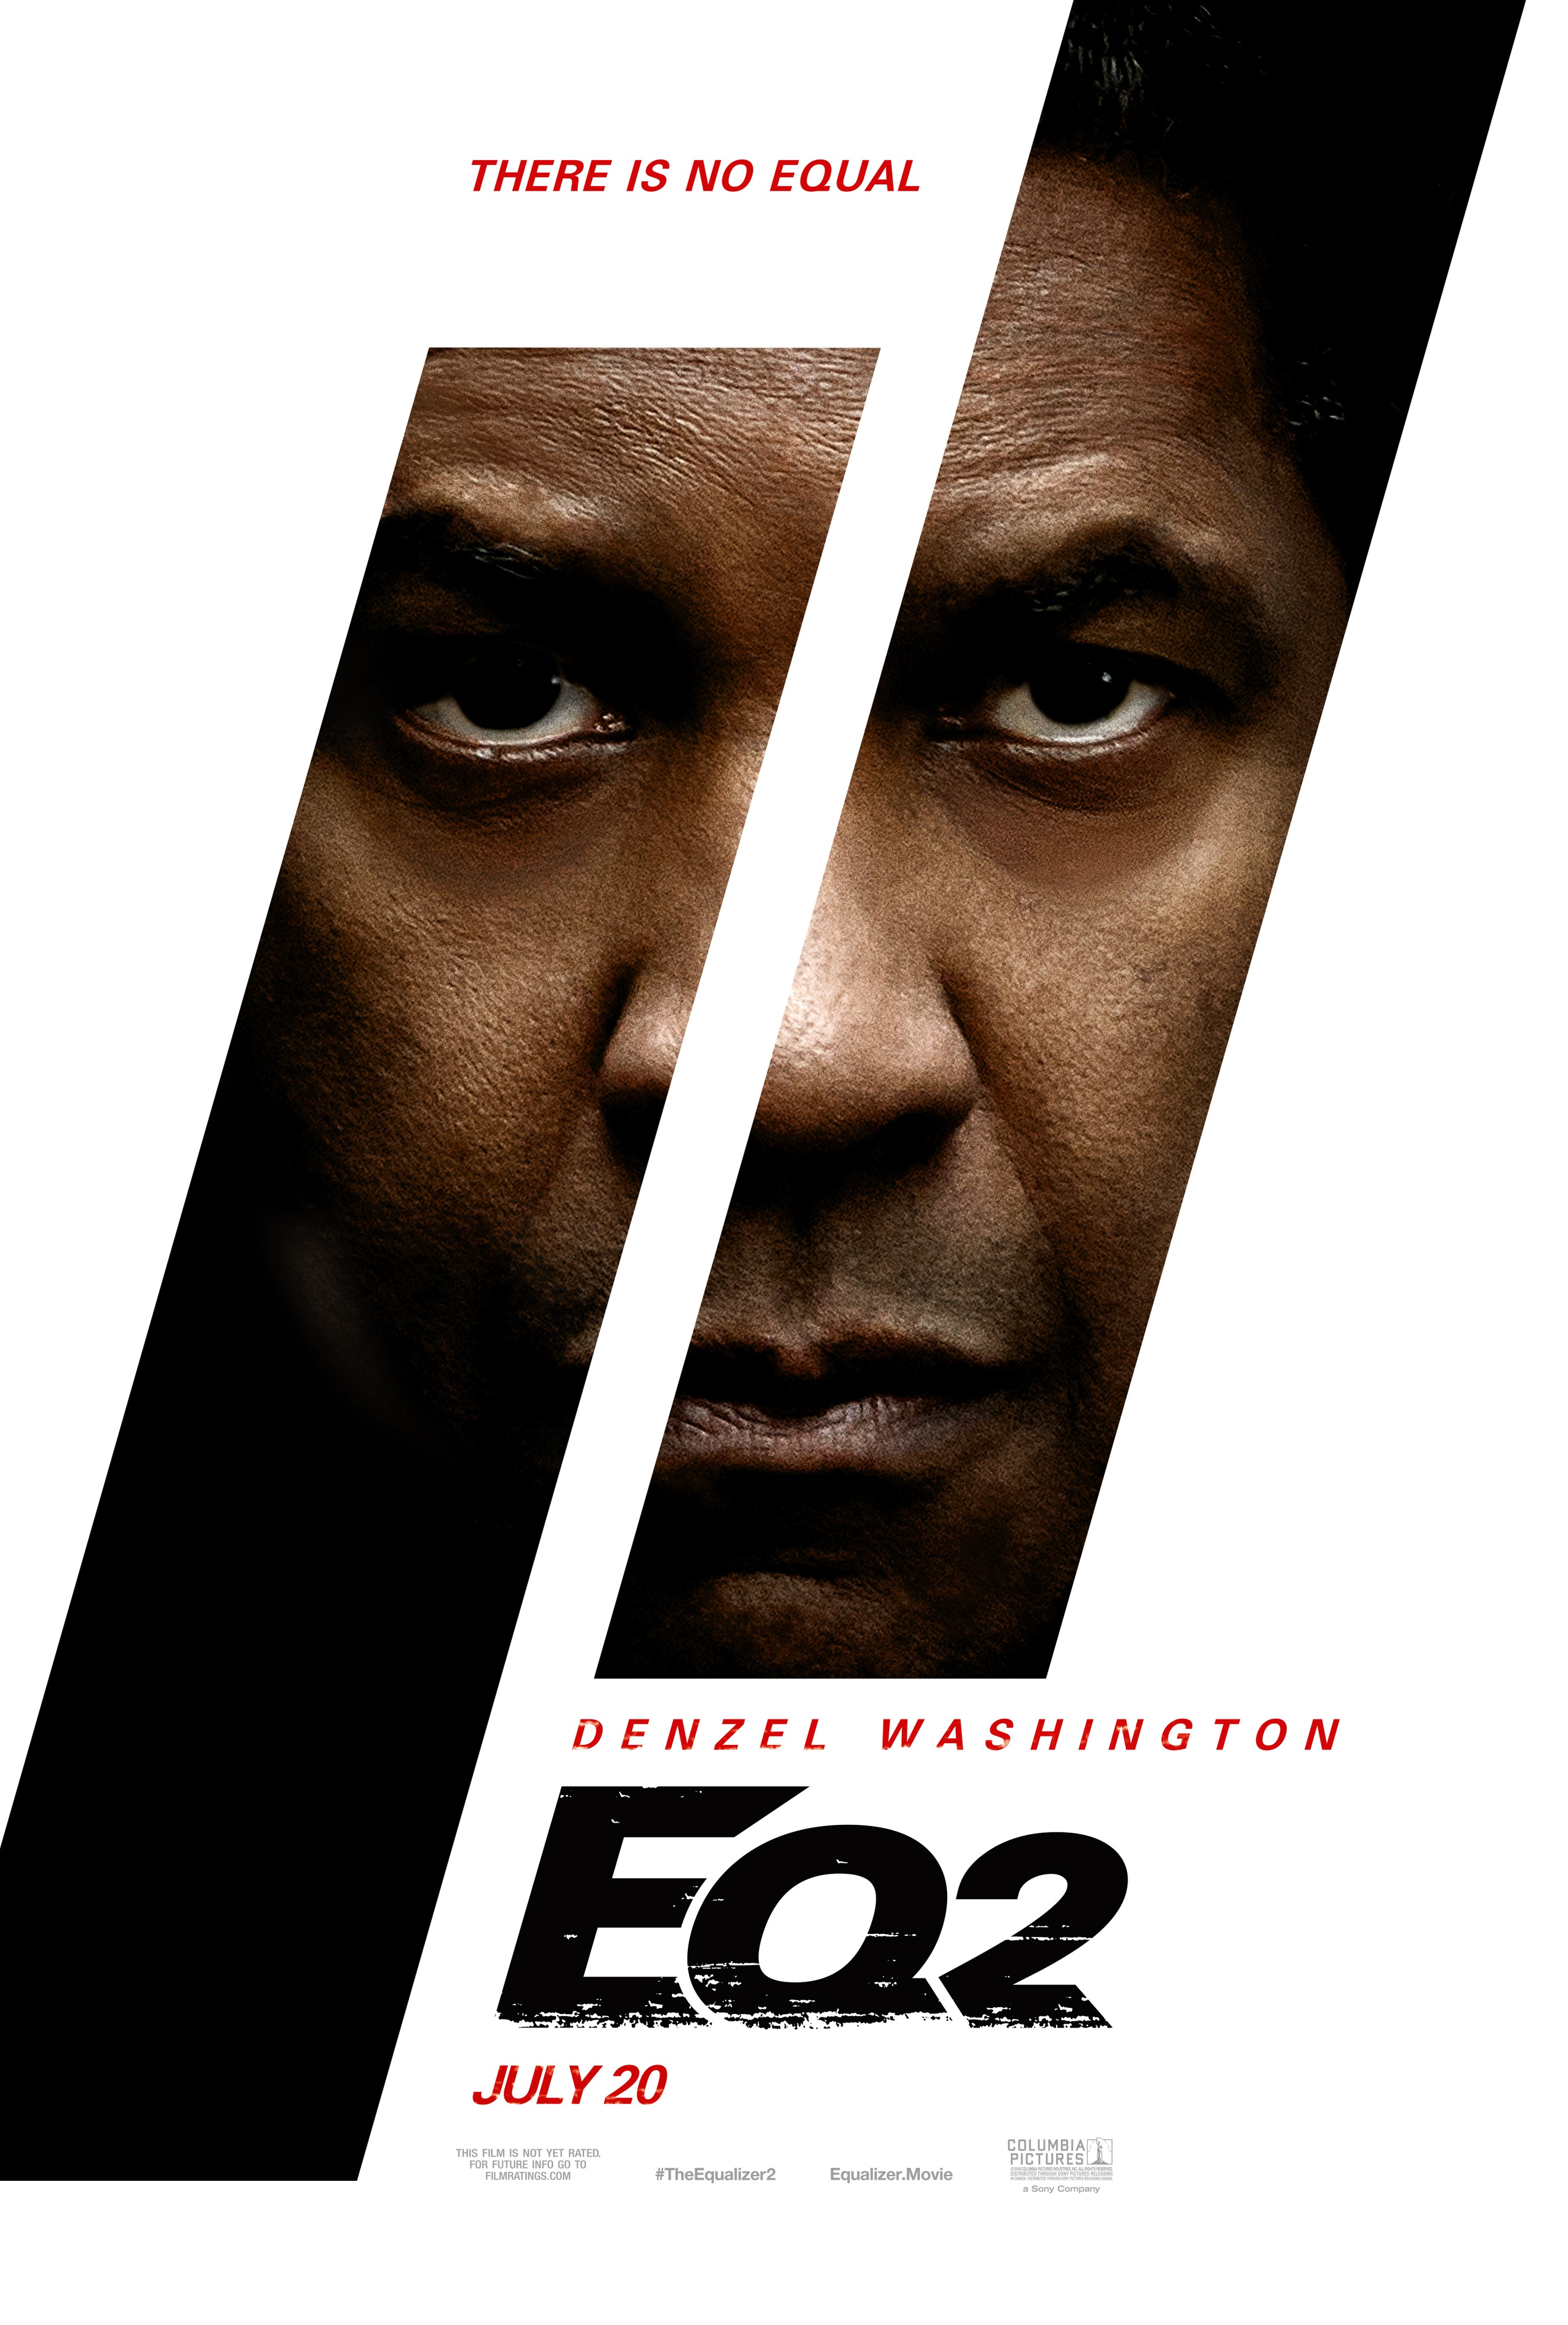 The Equalizer 2 Movie Download